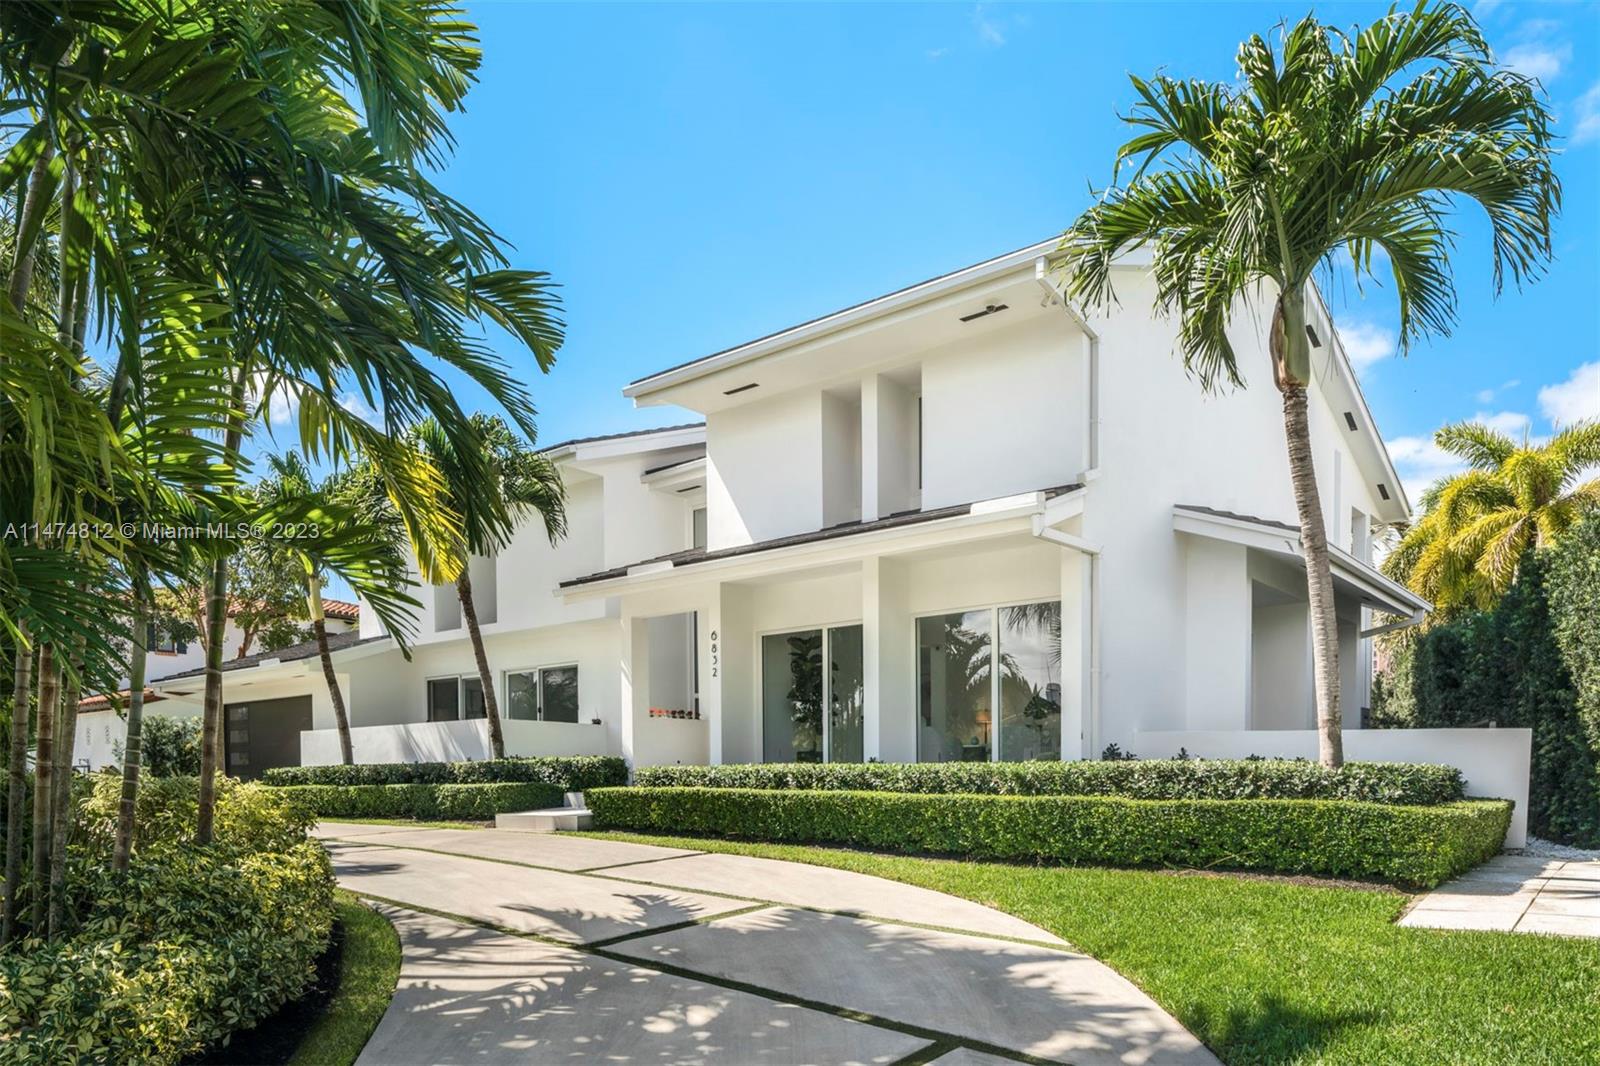 Property for Sale at 6832 Sunrise Ct Ct, Coral Gables, Broward County, Florida - Bedrooms: 5 
Bathrooms: 6  - $11,680,000